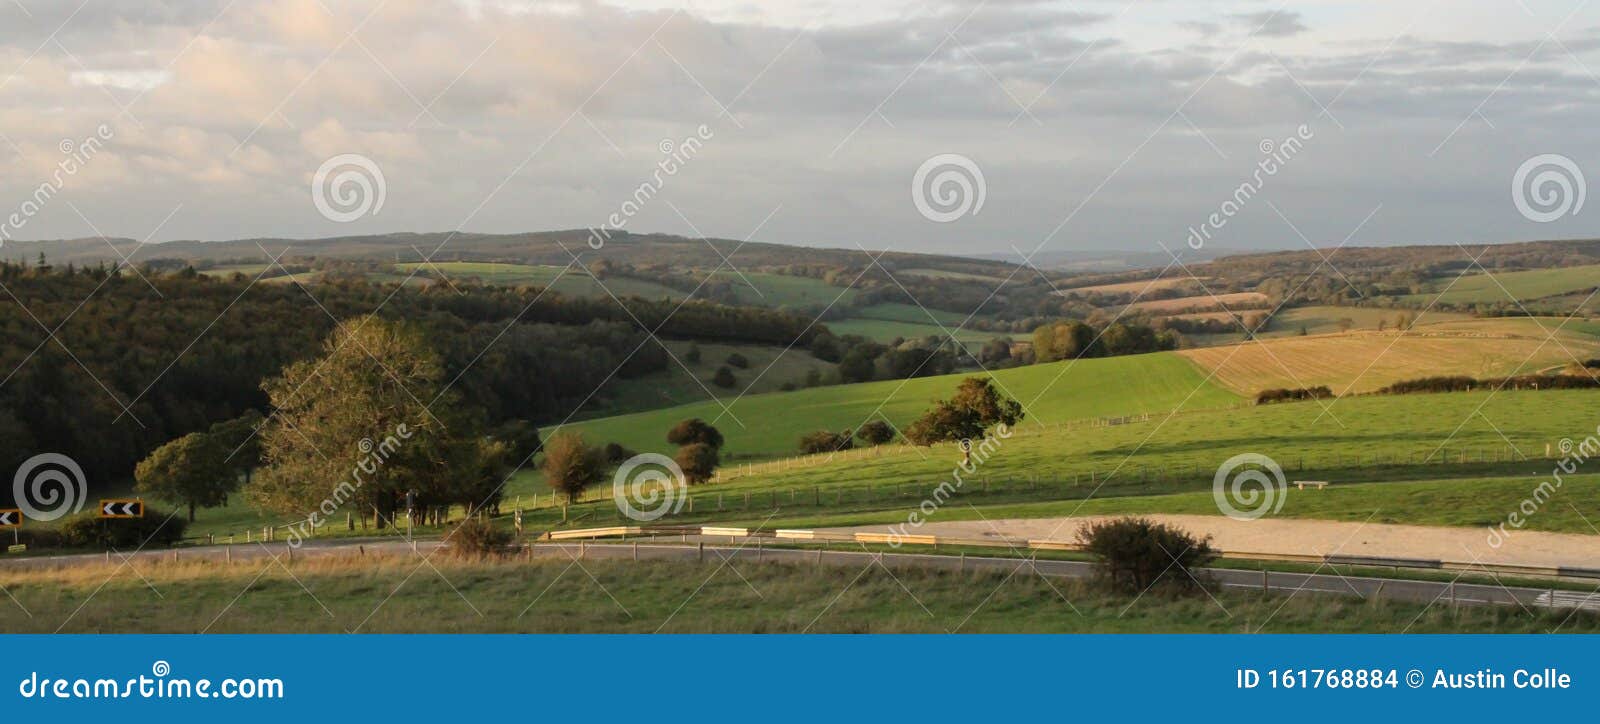 South Downs Near Goodwood Horse Racing Track In Southern England Stock Photo - Image of romp ...